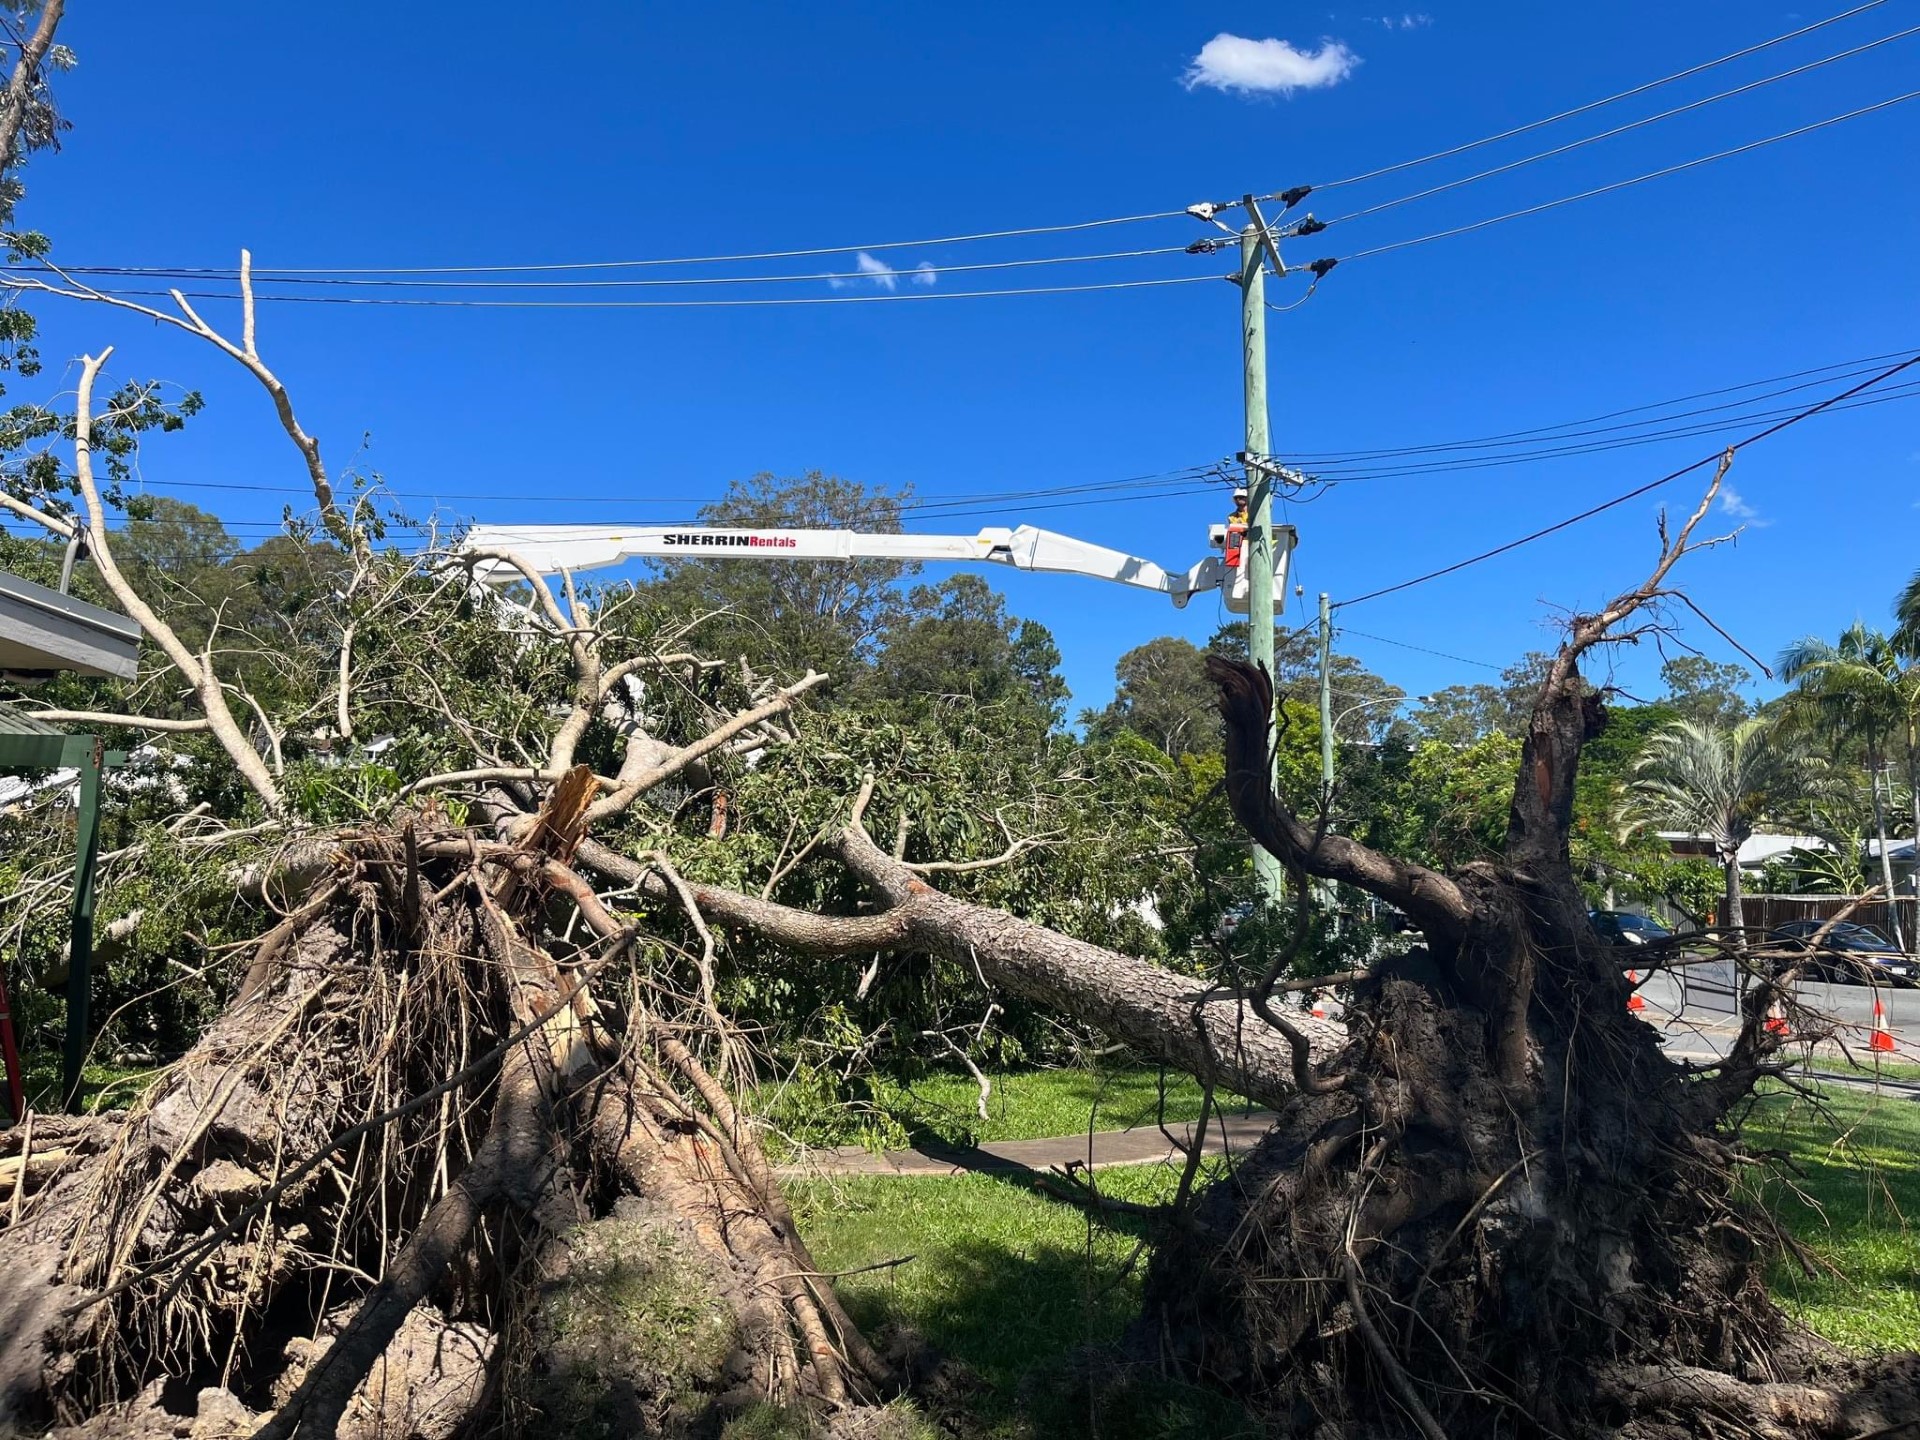 Professional arborists from Dynamic Tree Solutions clearing storm debris in SEQ, ensuring safety and aiding in swift recovery.